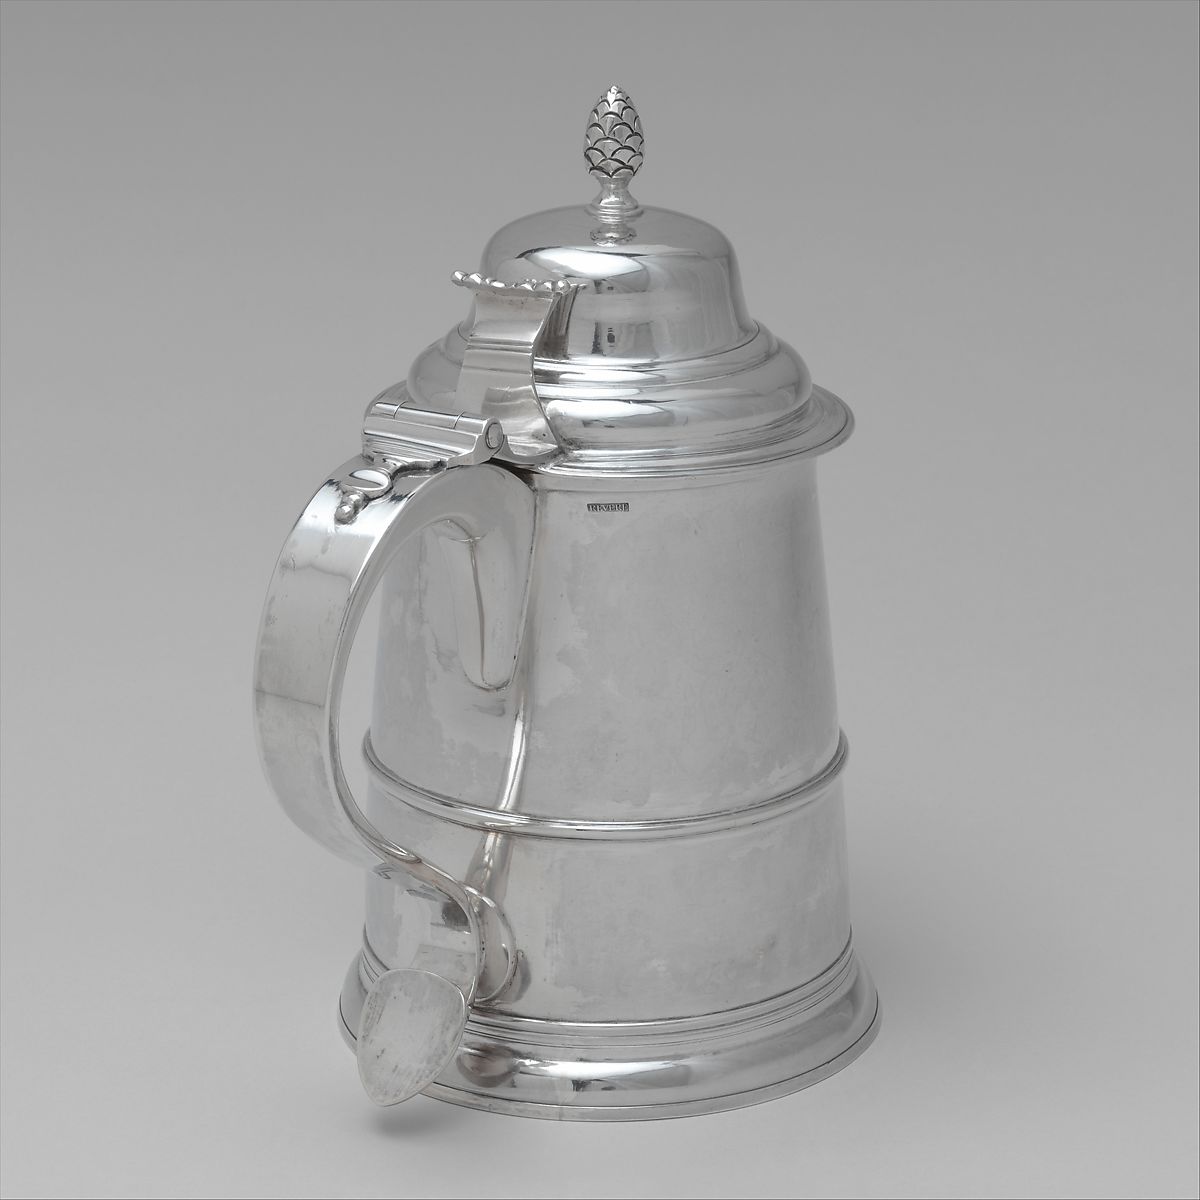 A silver tankard with a handle and a lid